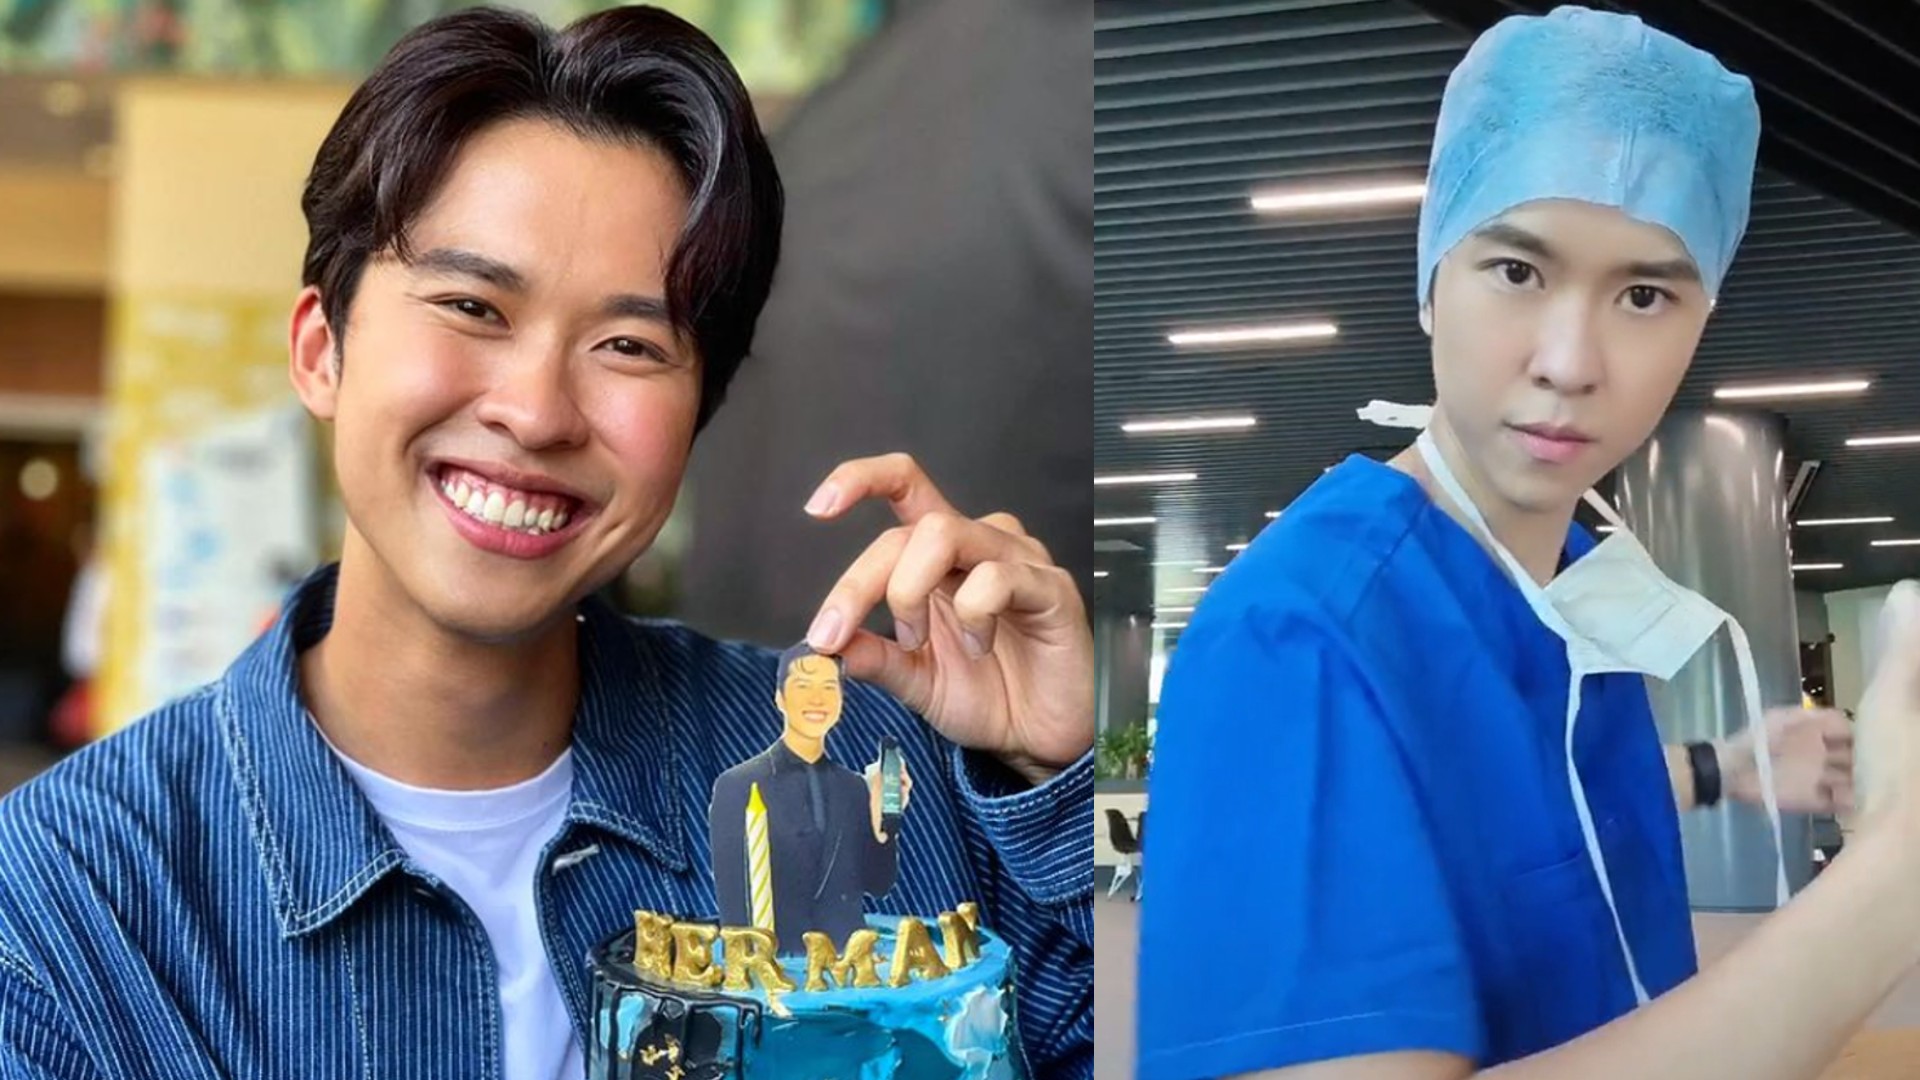 Mediacorp Actor Herman Keh, Whose Recent TikTok Got Over 16 Million Views,  Says He's Okay With Being Known As 'The TikTok Guy'… For Now - 8days